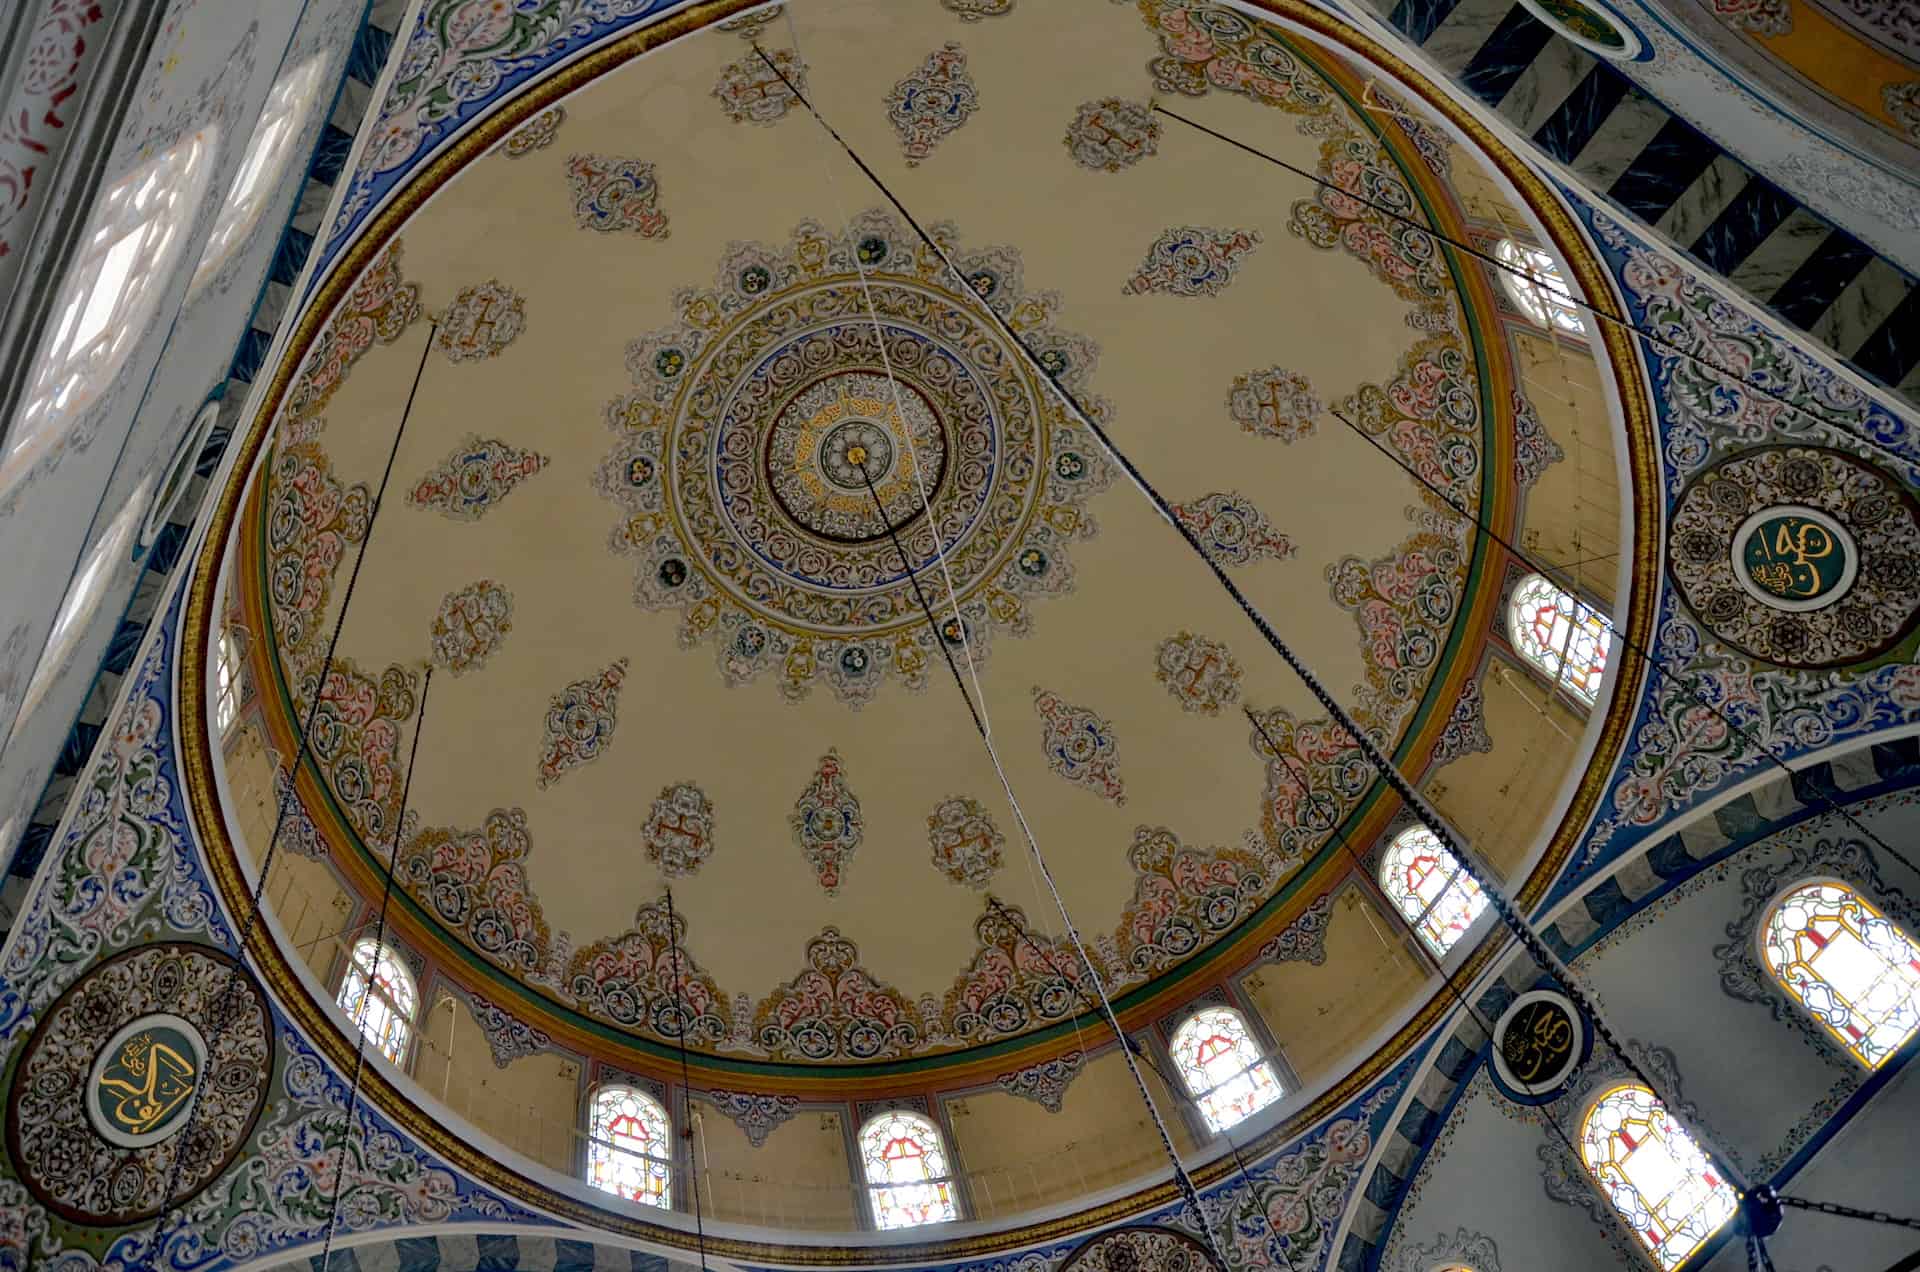 Dome of the İzzet Mehmed Pasha Mosque in Safranbolu, Turkey